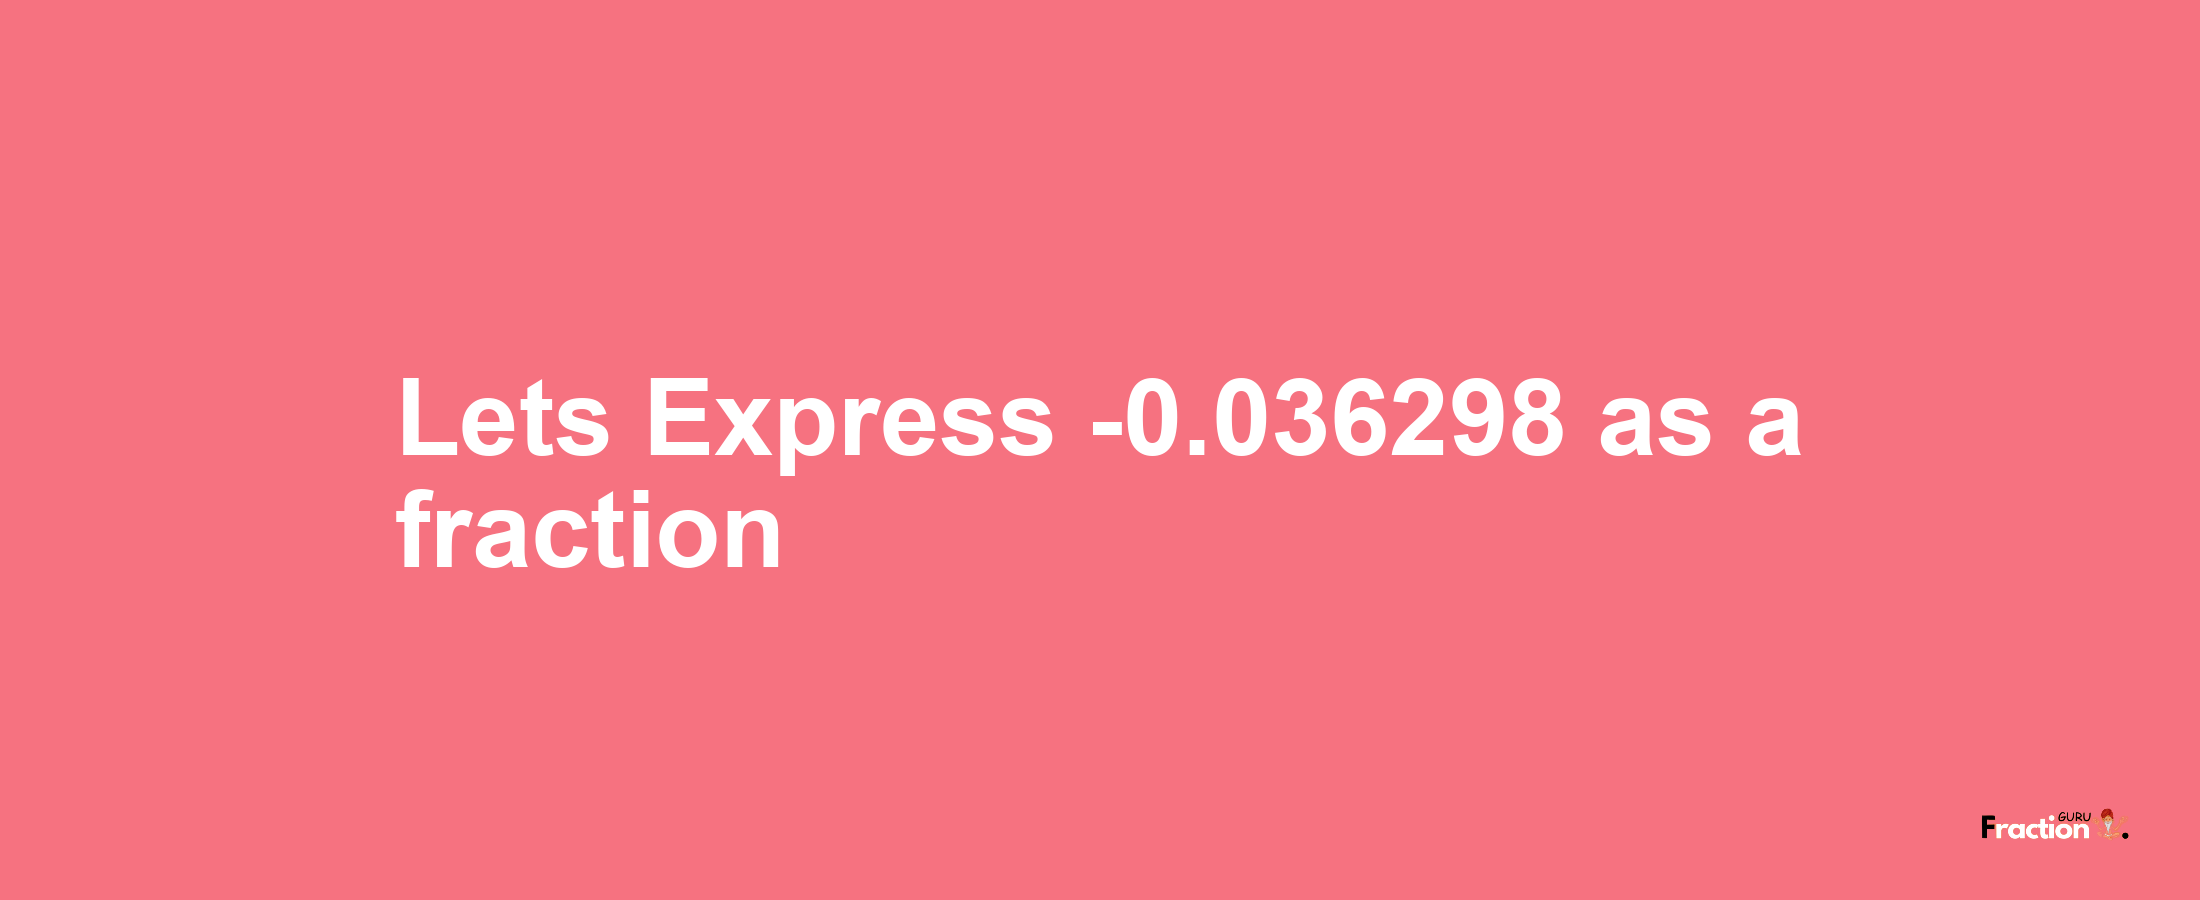 Lets Express -0.036298 as afraction